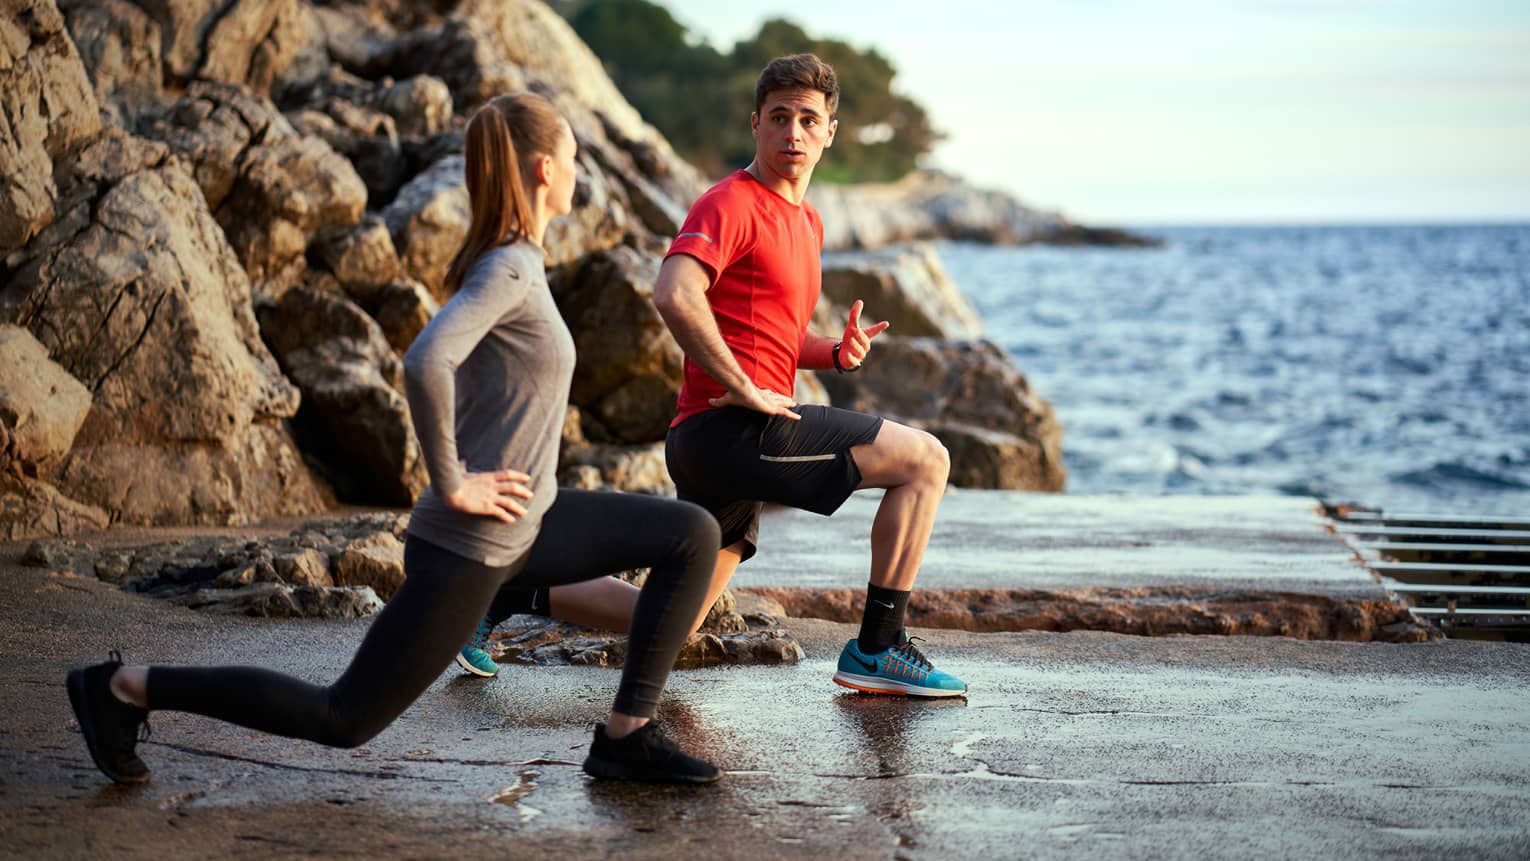 A man trains a woman while doing lunges outside next to the sea and rocks